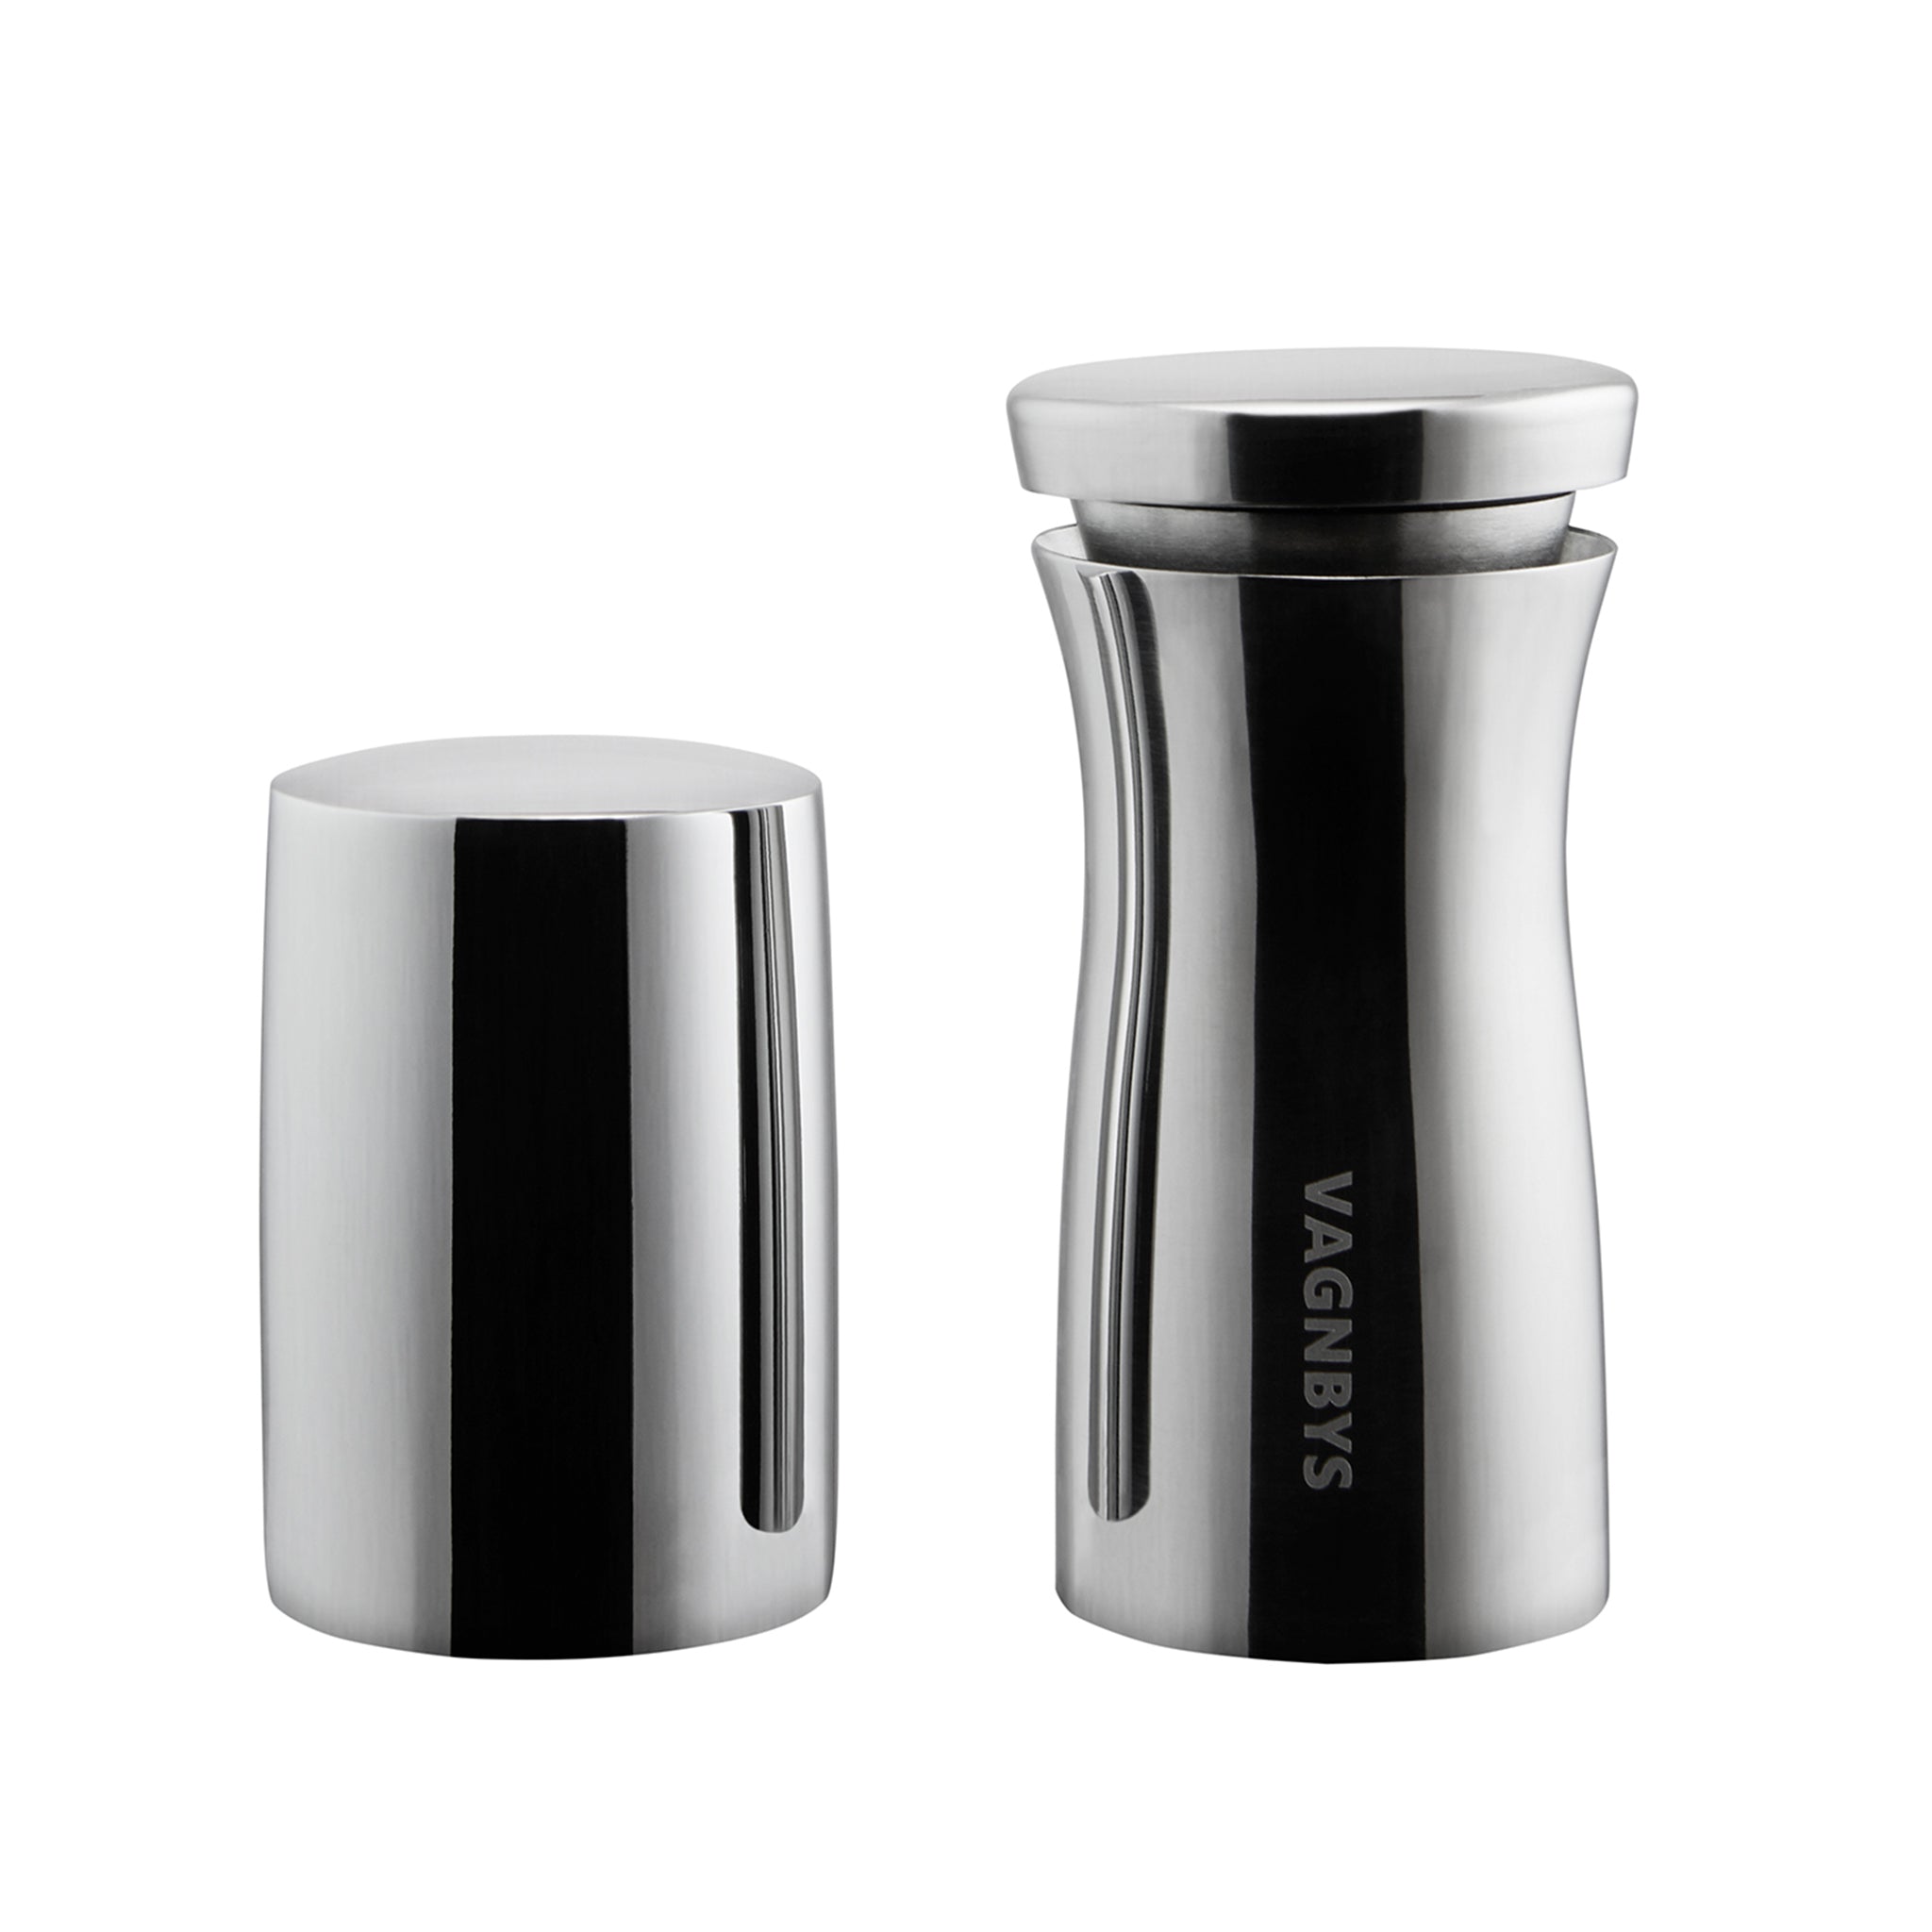  Vagnbys® Wine Decantiere + Stopper Set by Ethan+Ashe Ethan+Ashe Perfumarie